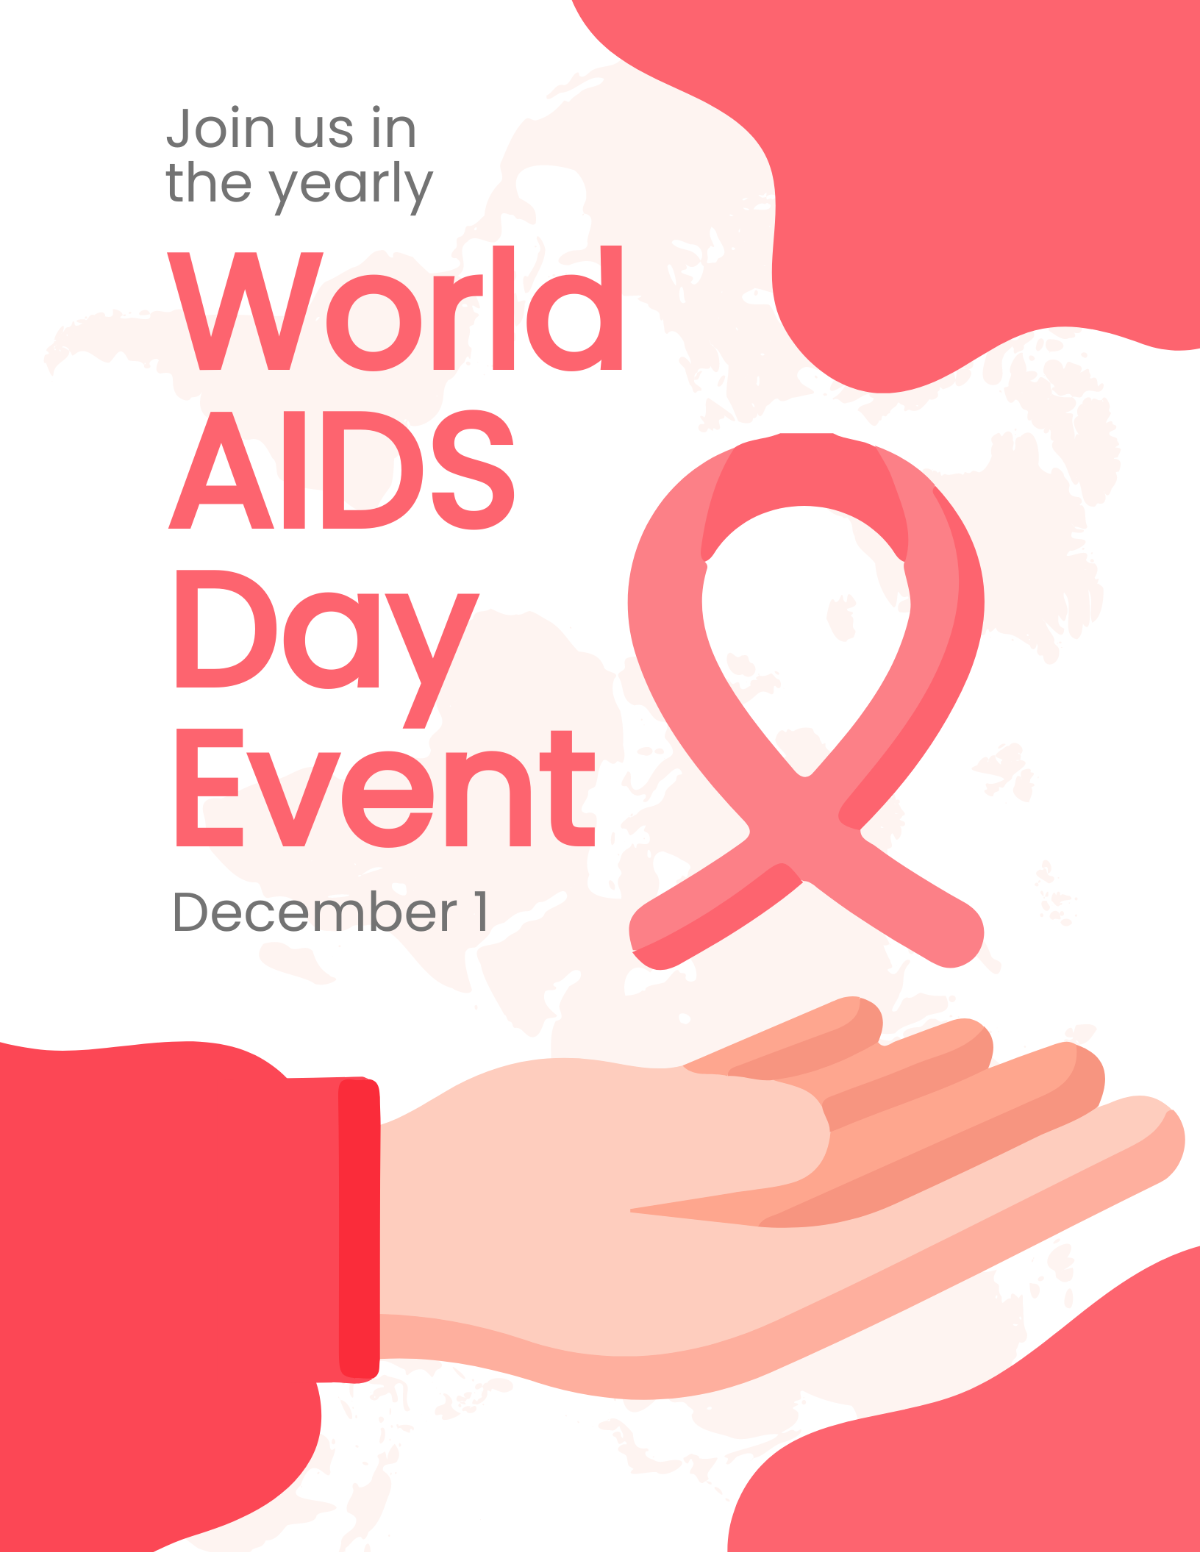 World AIDS Day Event Flyer Template